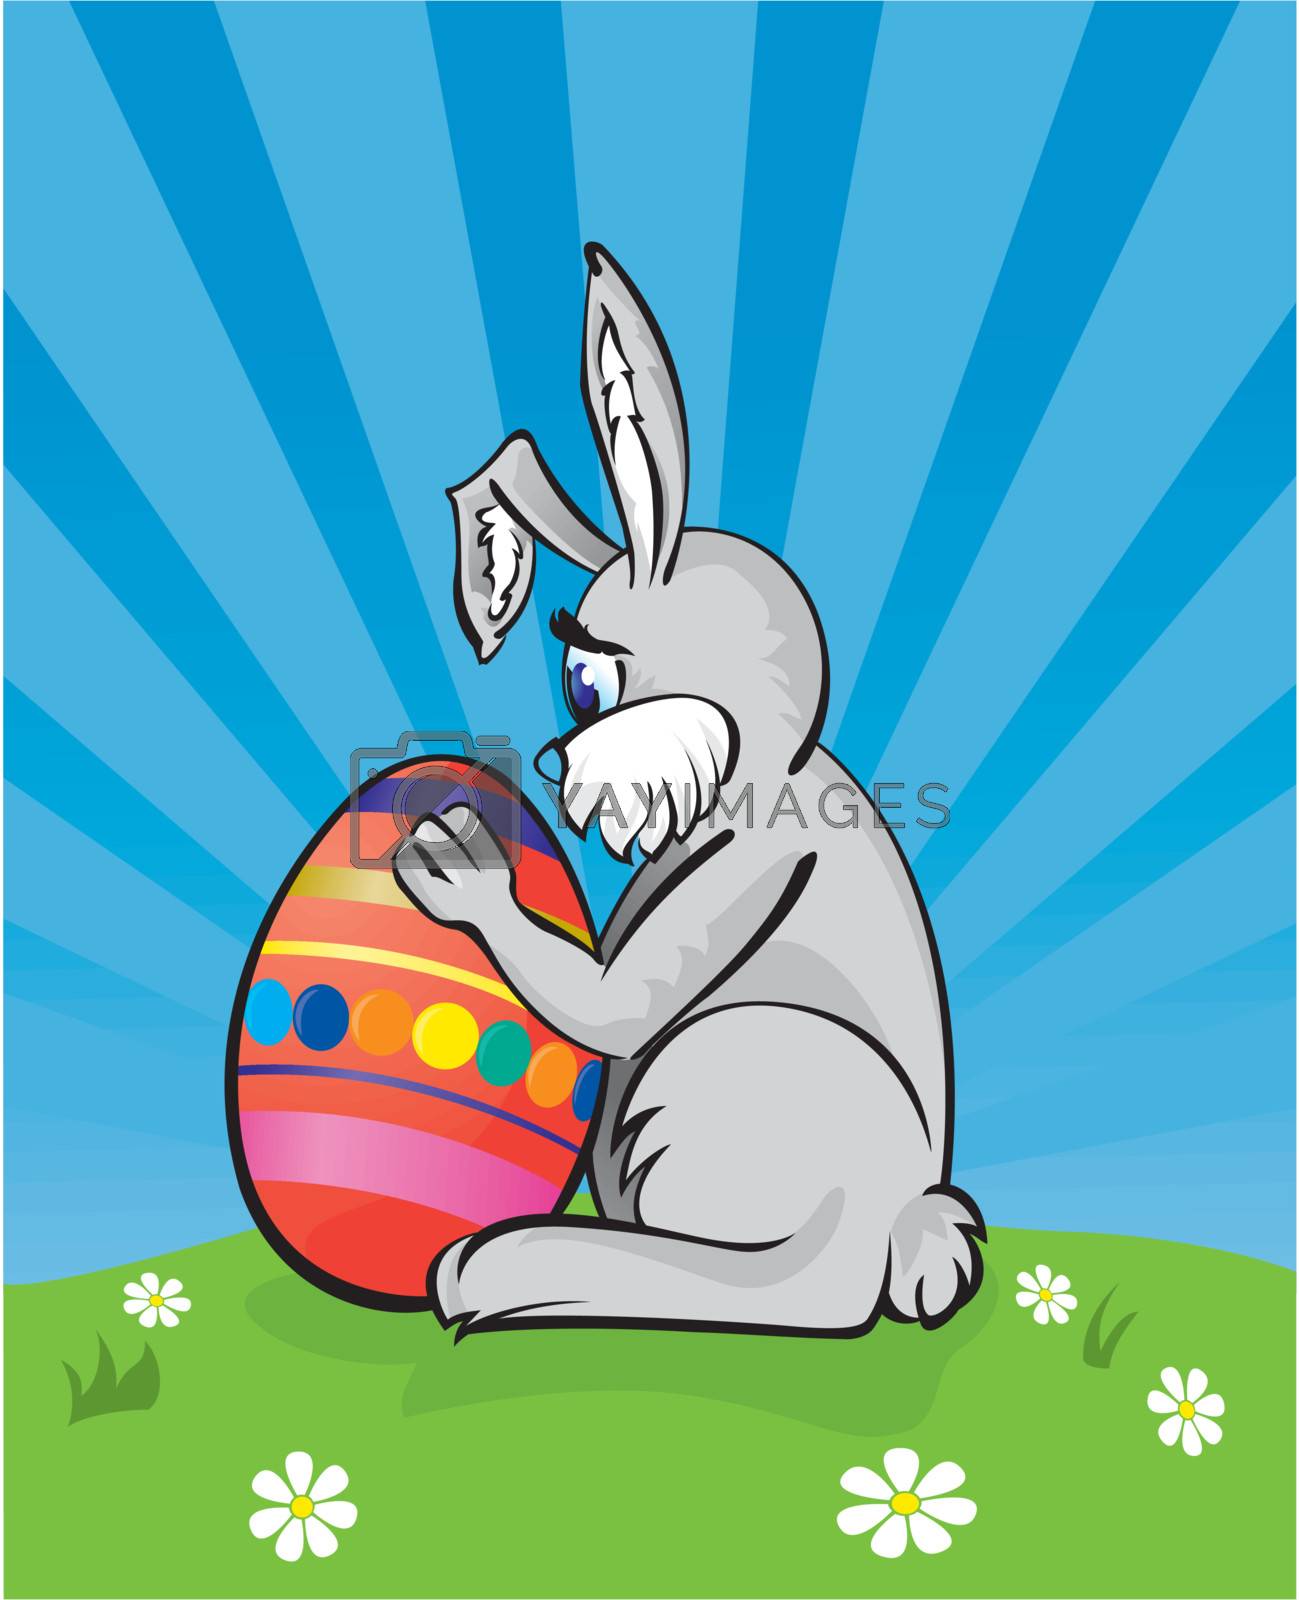 Royalty free image of Easter bunny by PauloResende